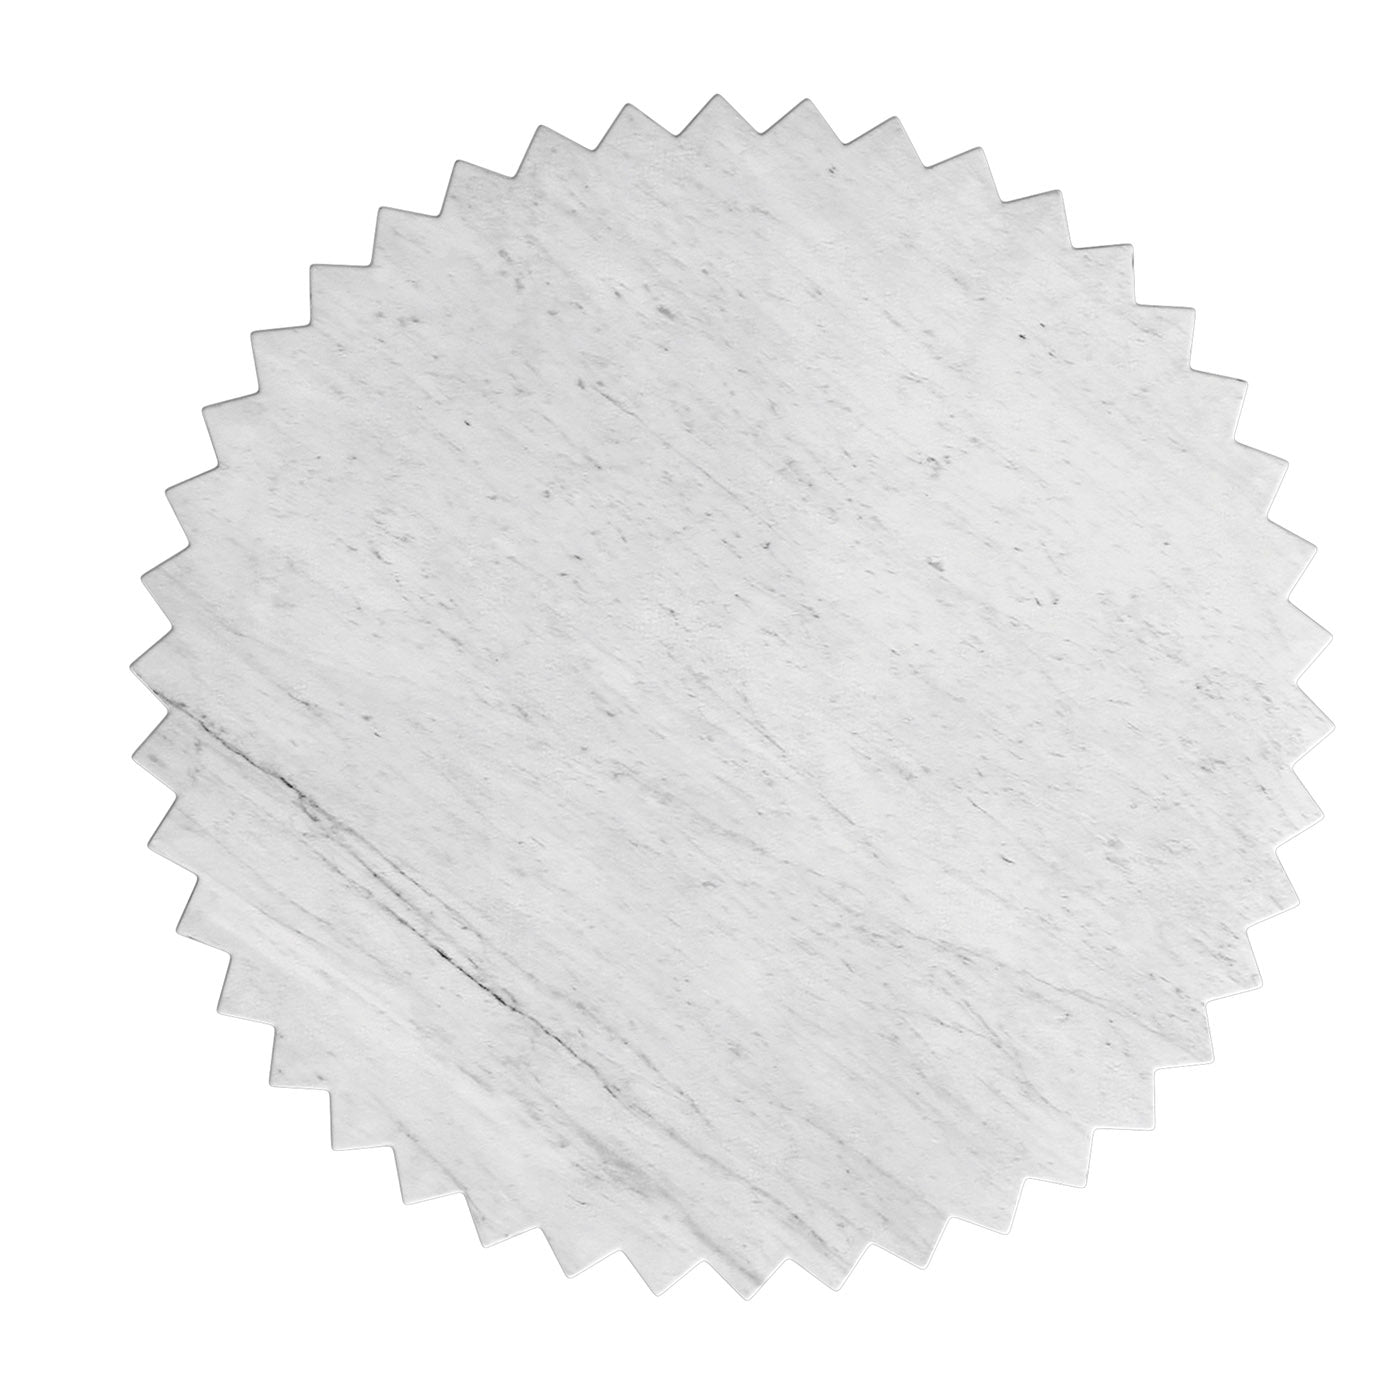 Doris Multifaceted In White Carrara Marble Coffee Table  - Alternative view 4